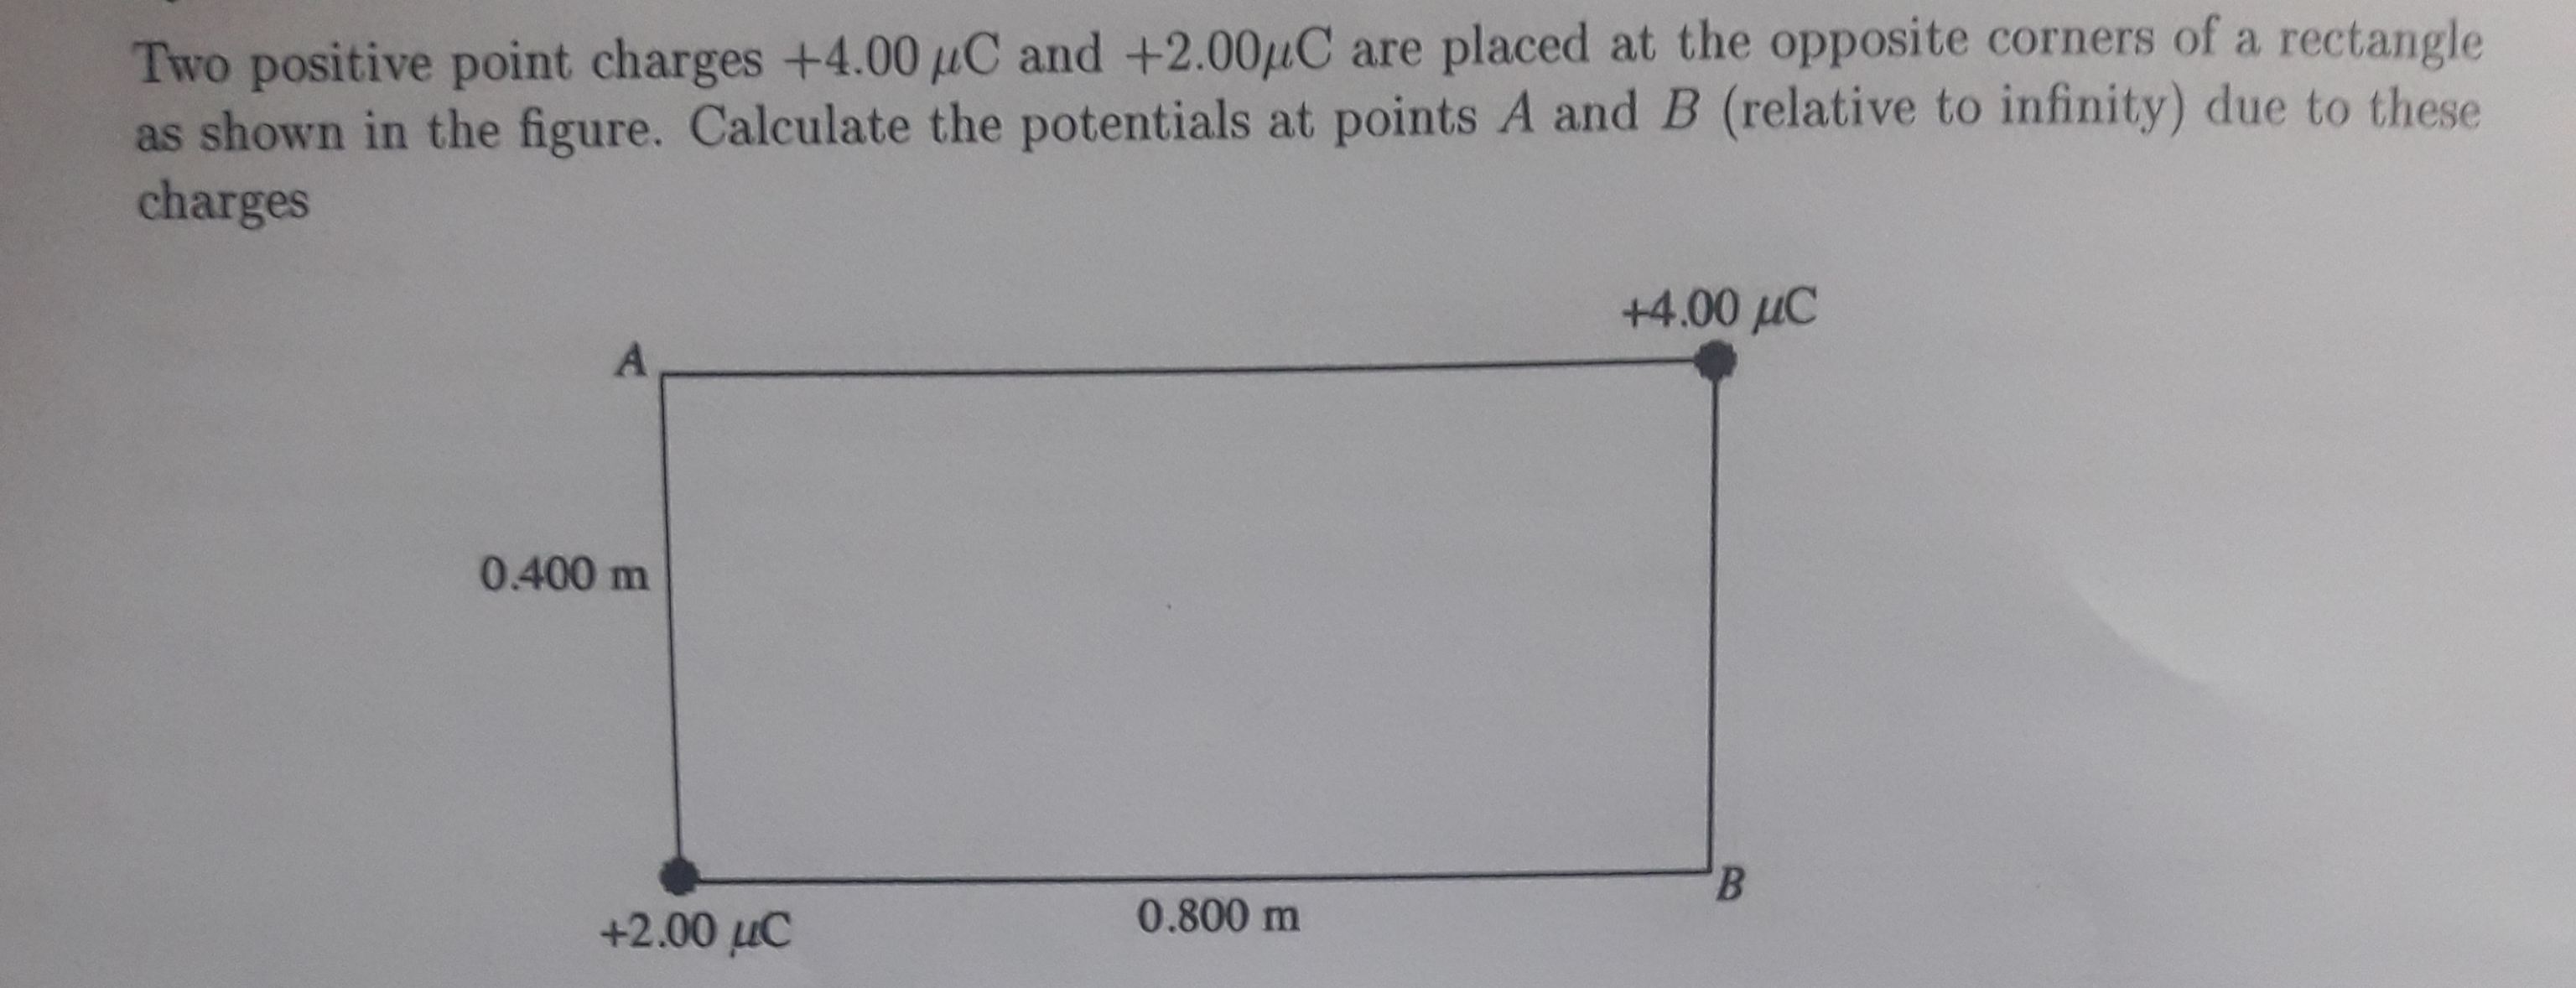 Two positive point charges +4.00 µC and +2.00µC are placed at the opposite corners of a rectangle
as shown in the figure. Calculate the potentials at points A and B (relative to infinity) due to these
charges
+4.00 uC
A
0.400 m
B.
+2.00 µC
0.800 m
